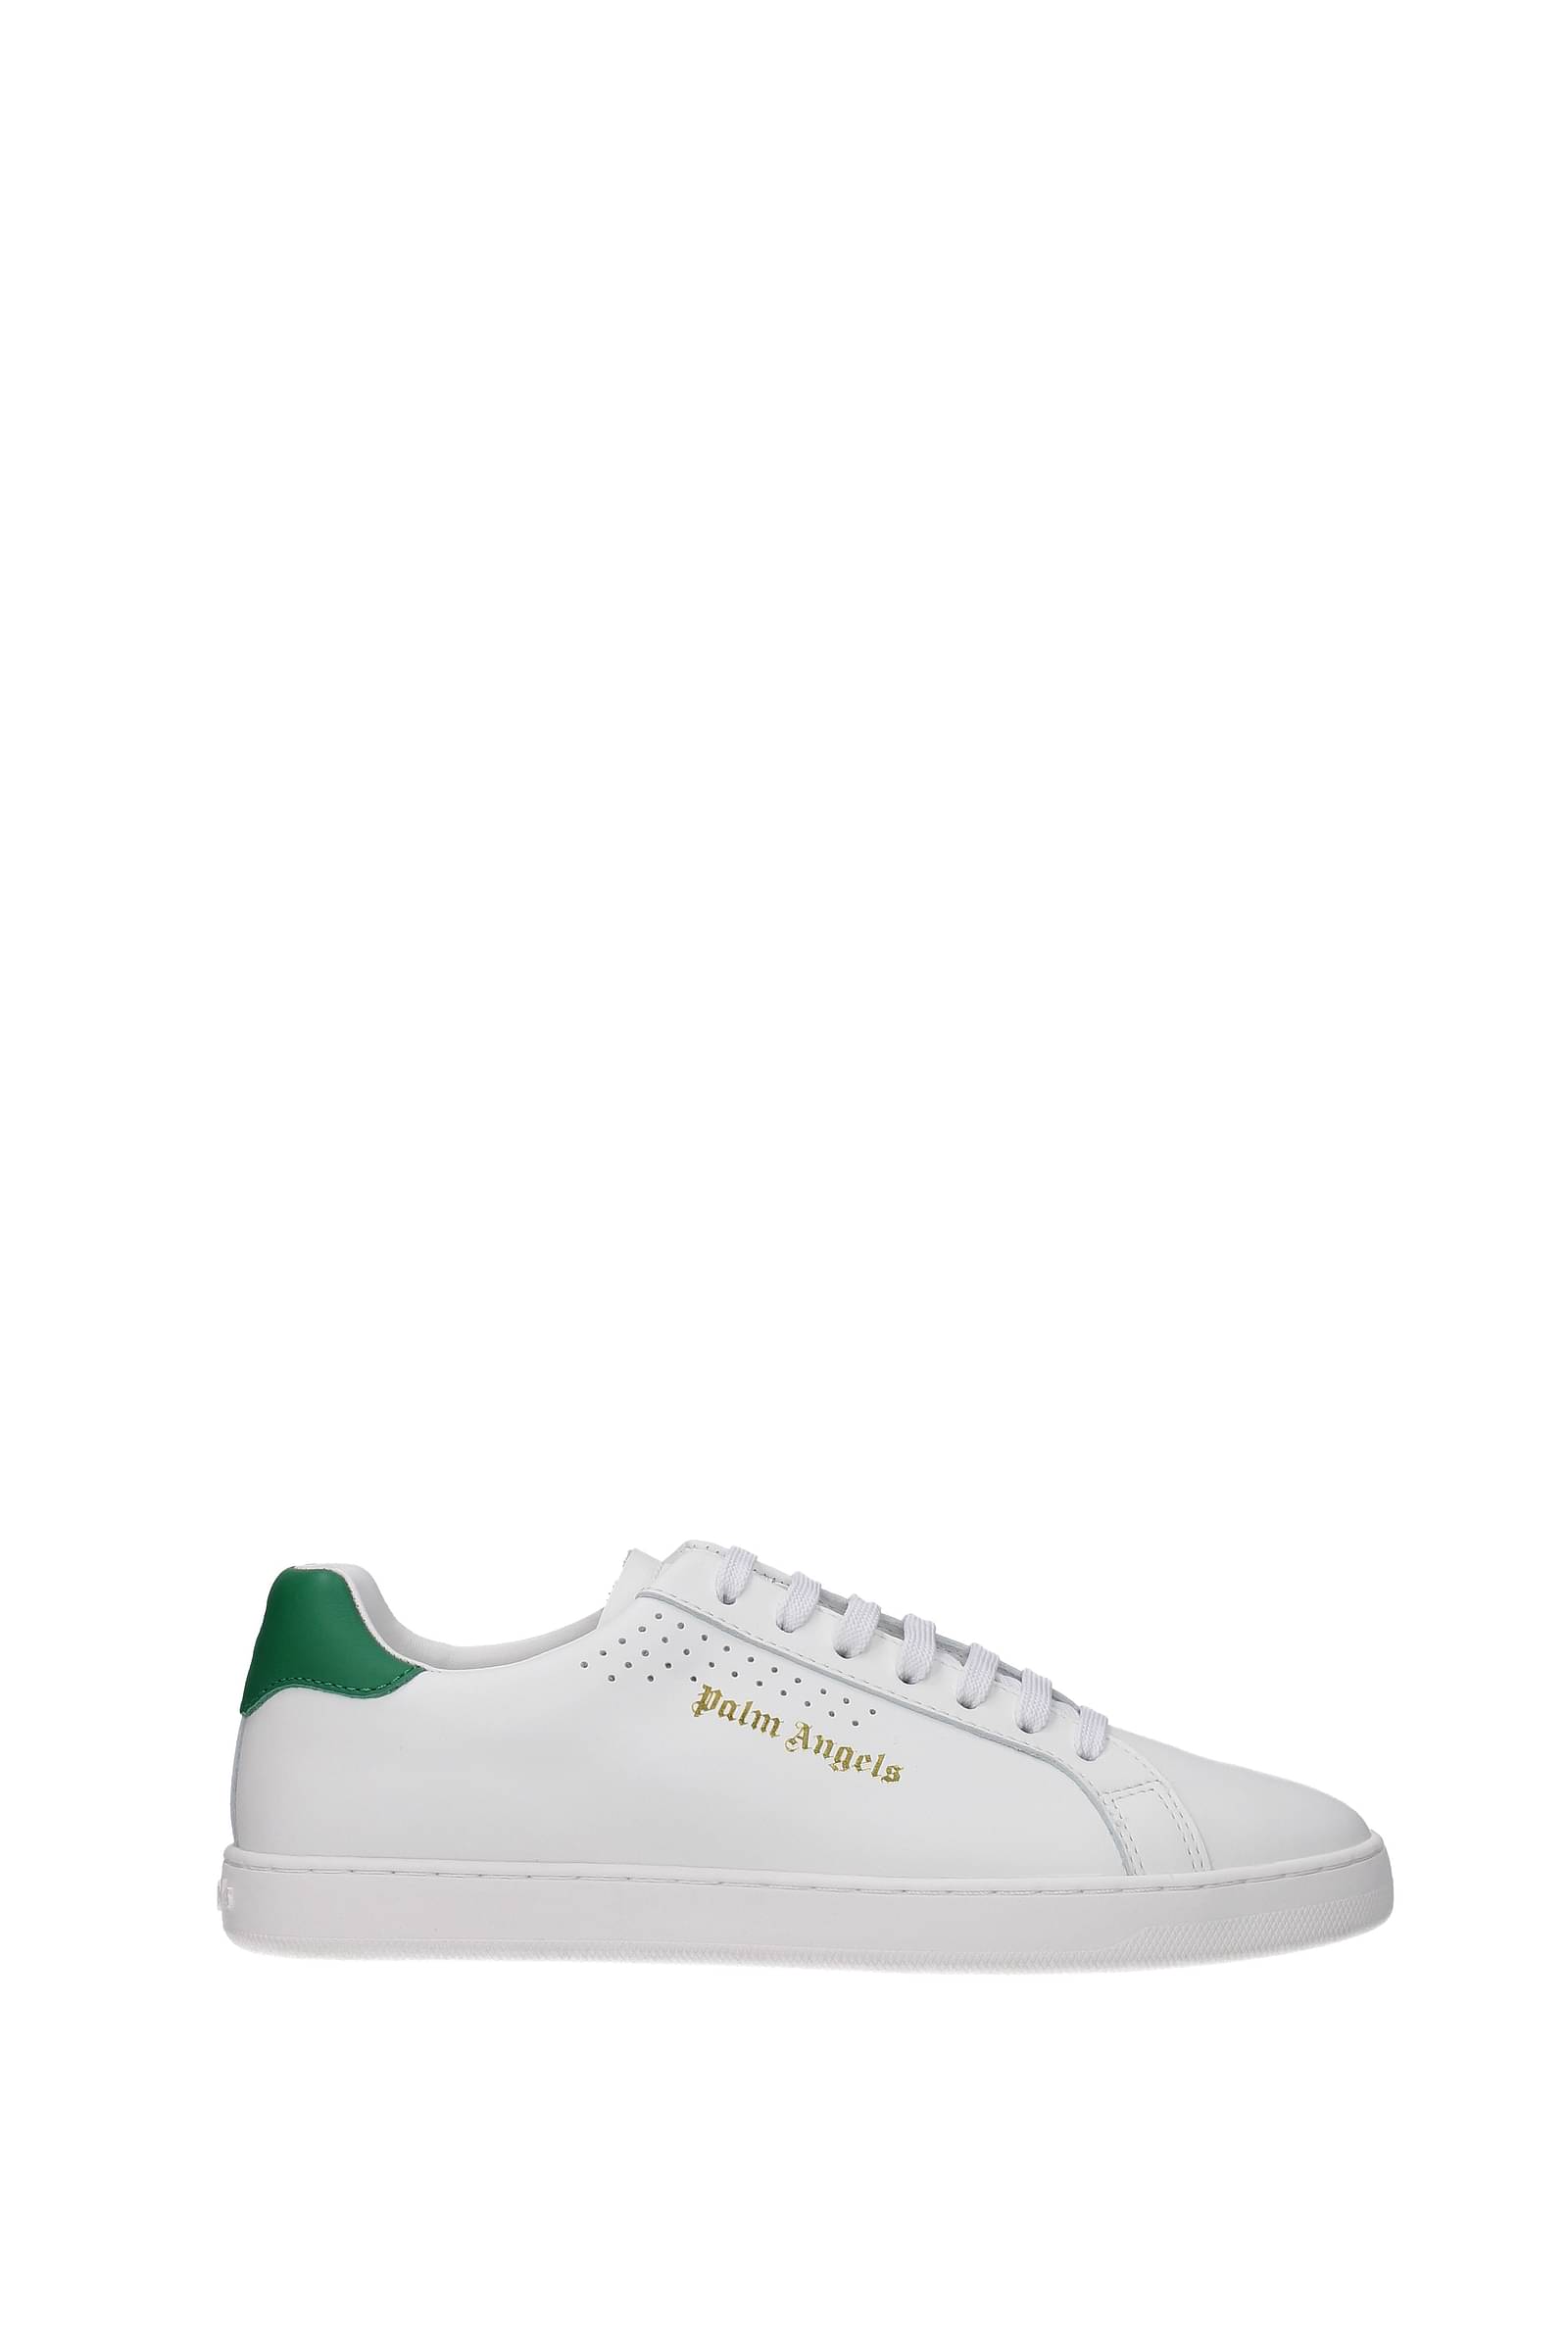 PALM ANGELS SNEAKERS LEATHER WHITE GREEN